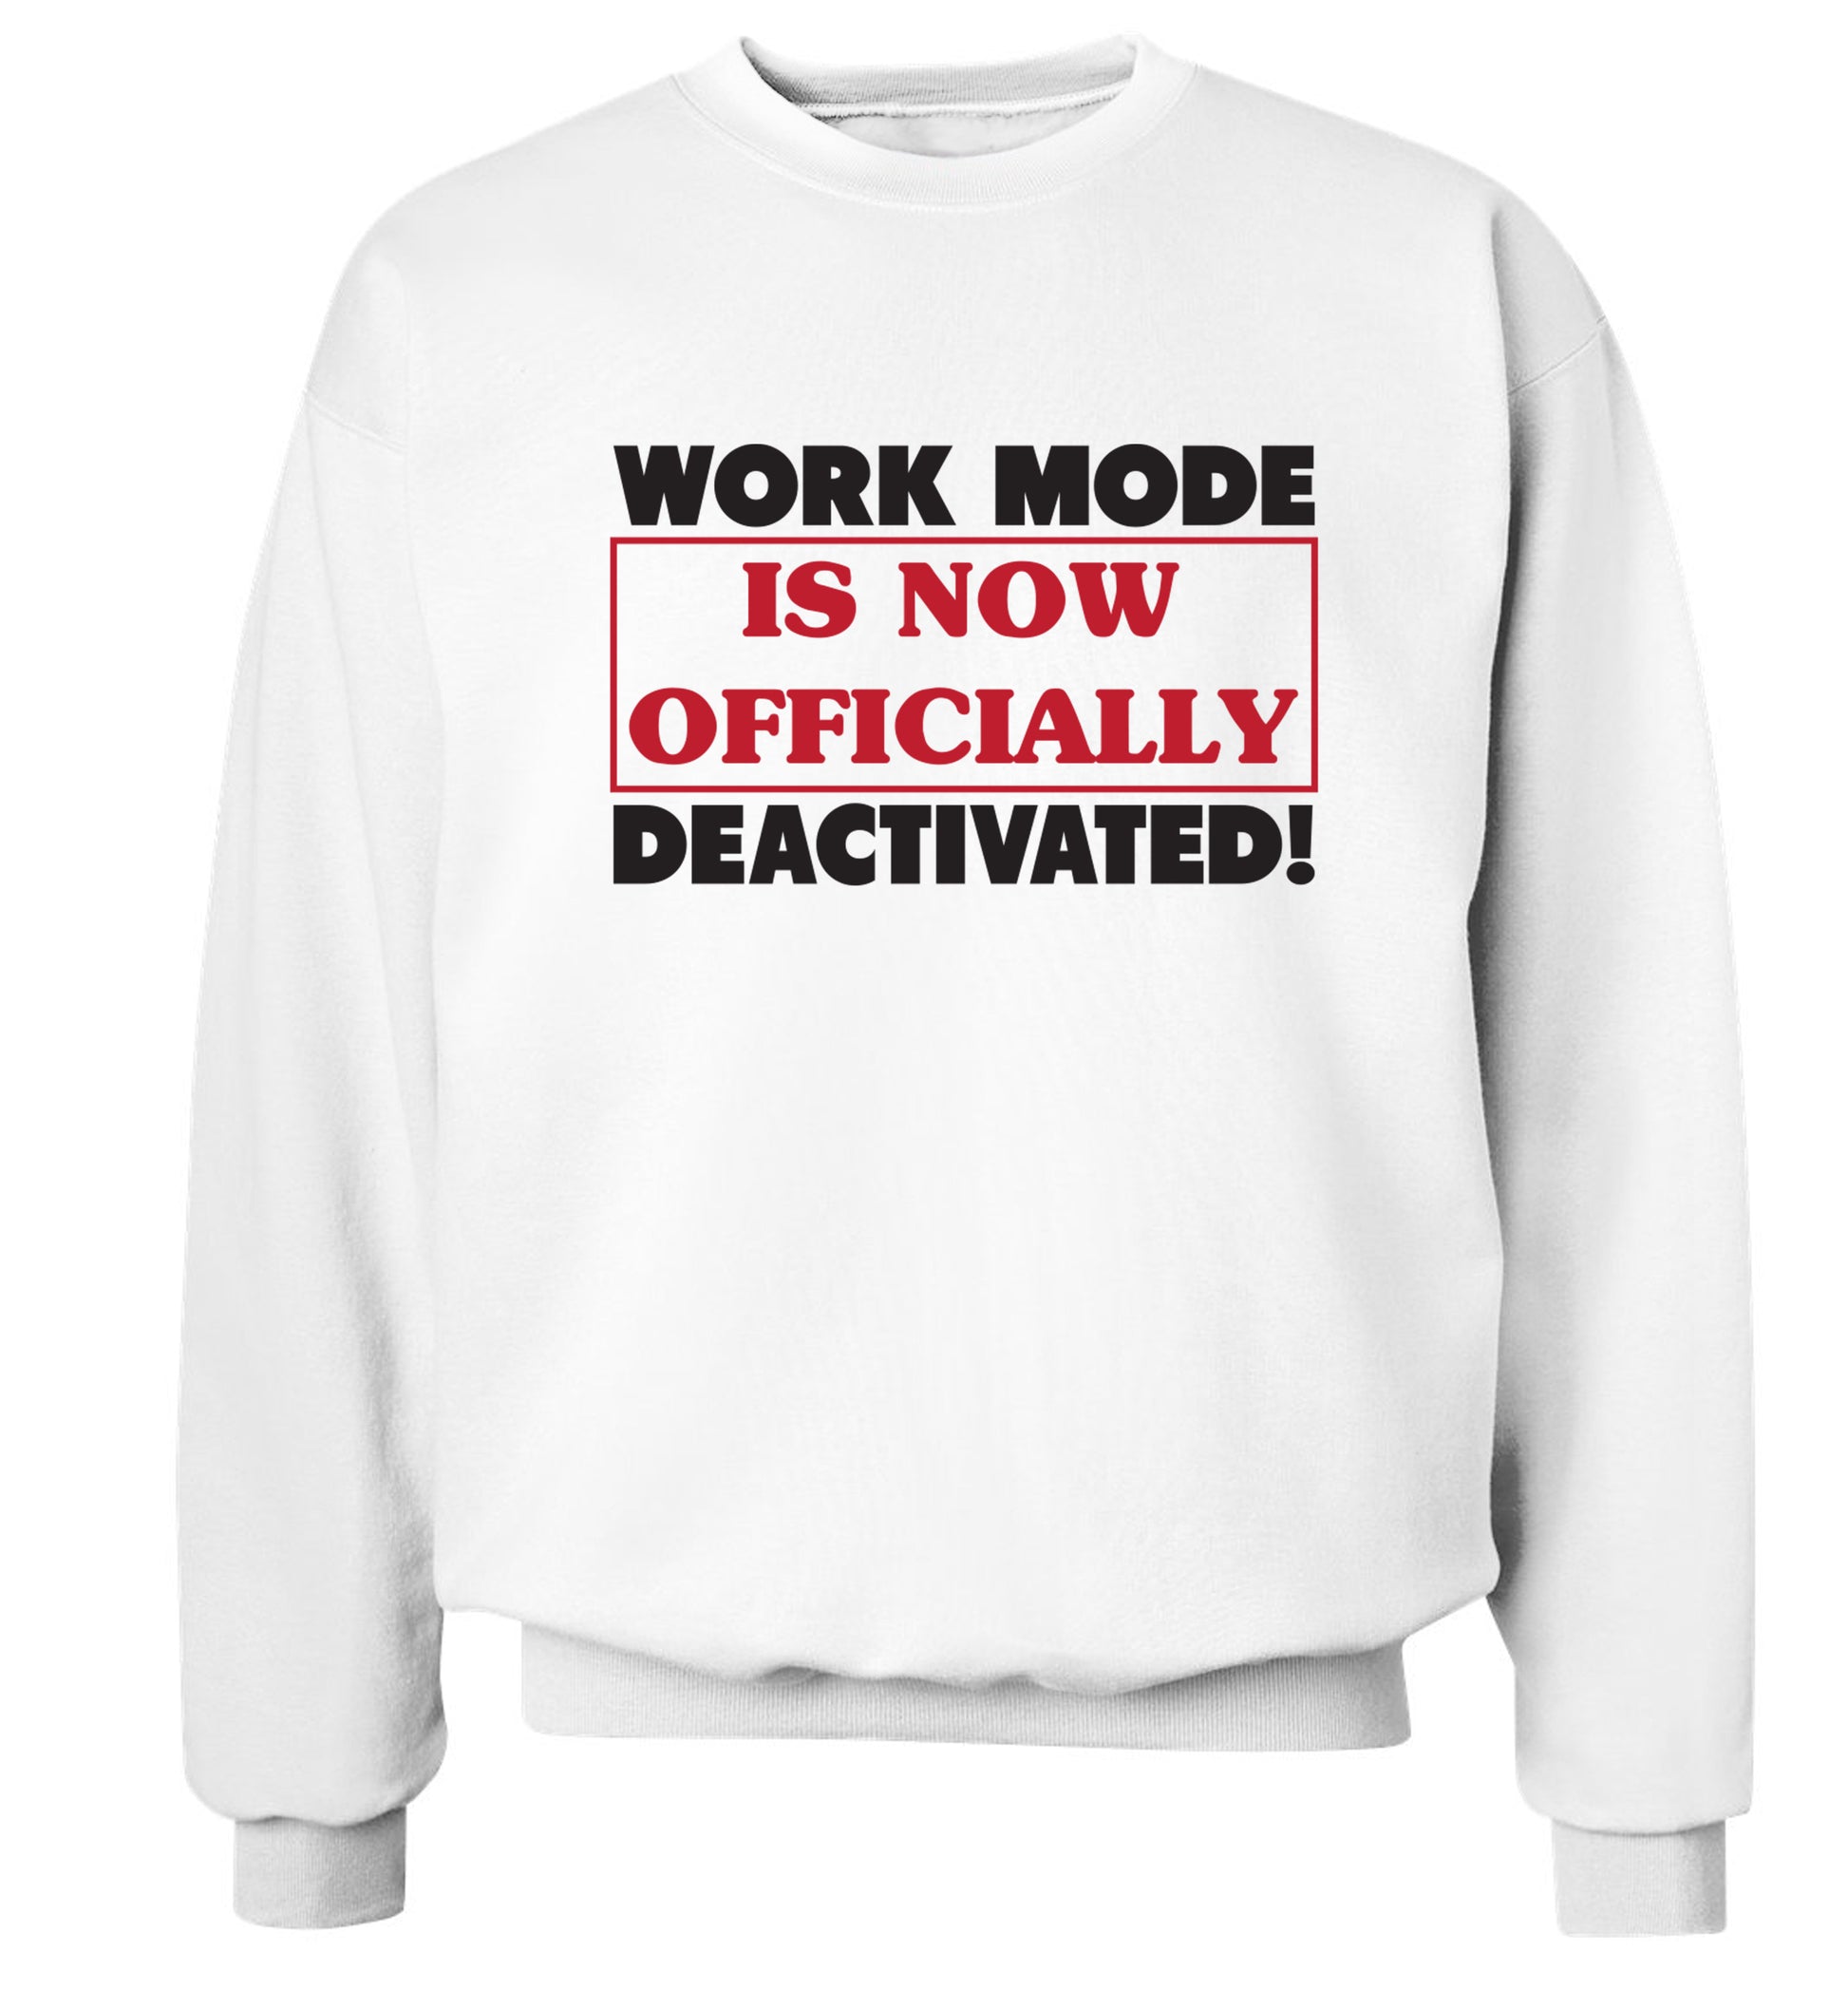 Work mode is now officially deactivated Adult's unisex white Sweater 2XL